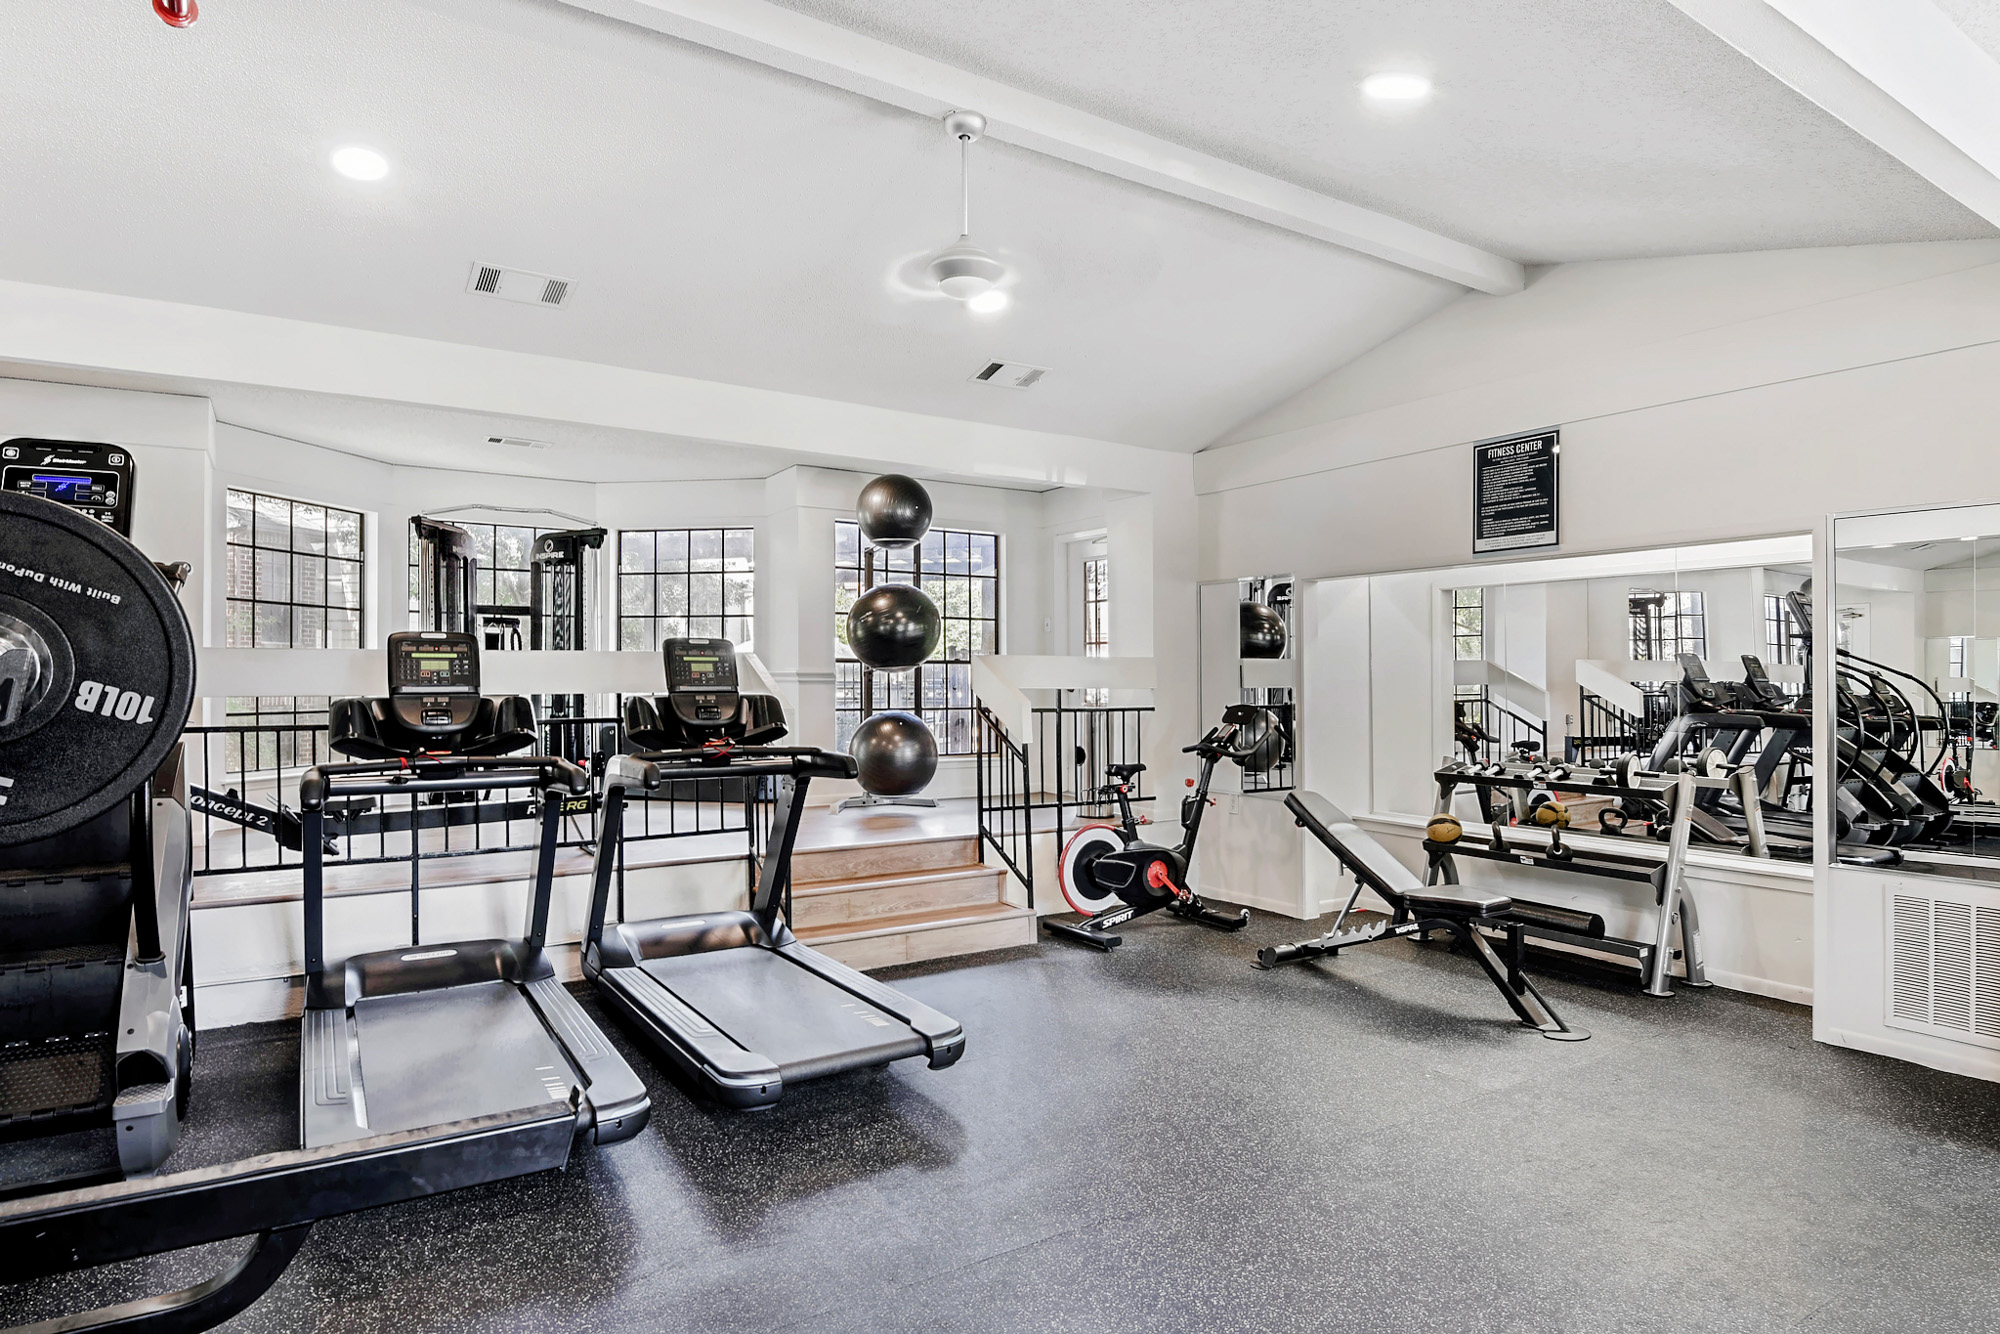 The fitness center at The Arbors at Wells Branch apartments in Austin, TX.